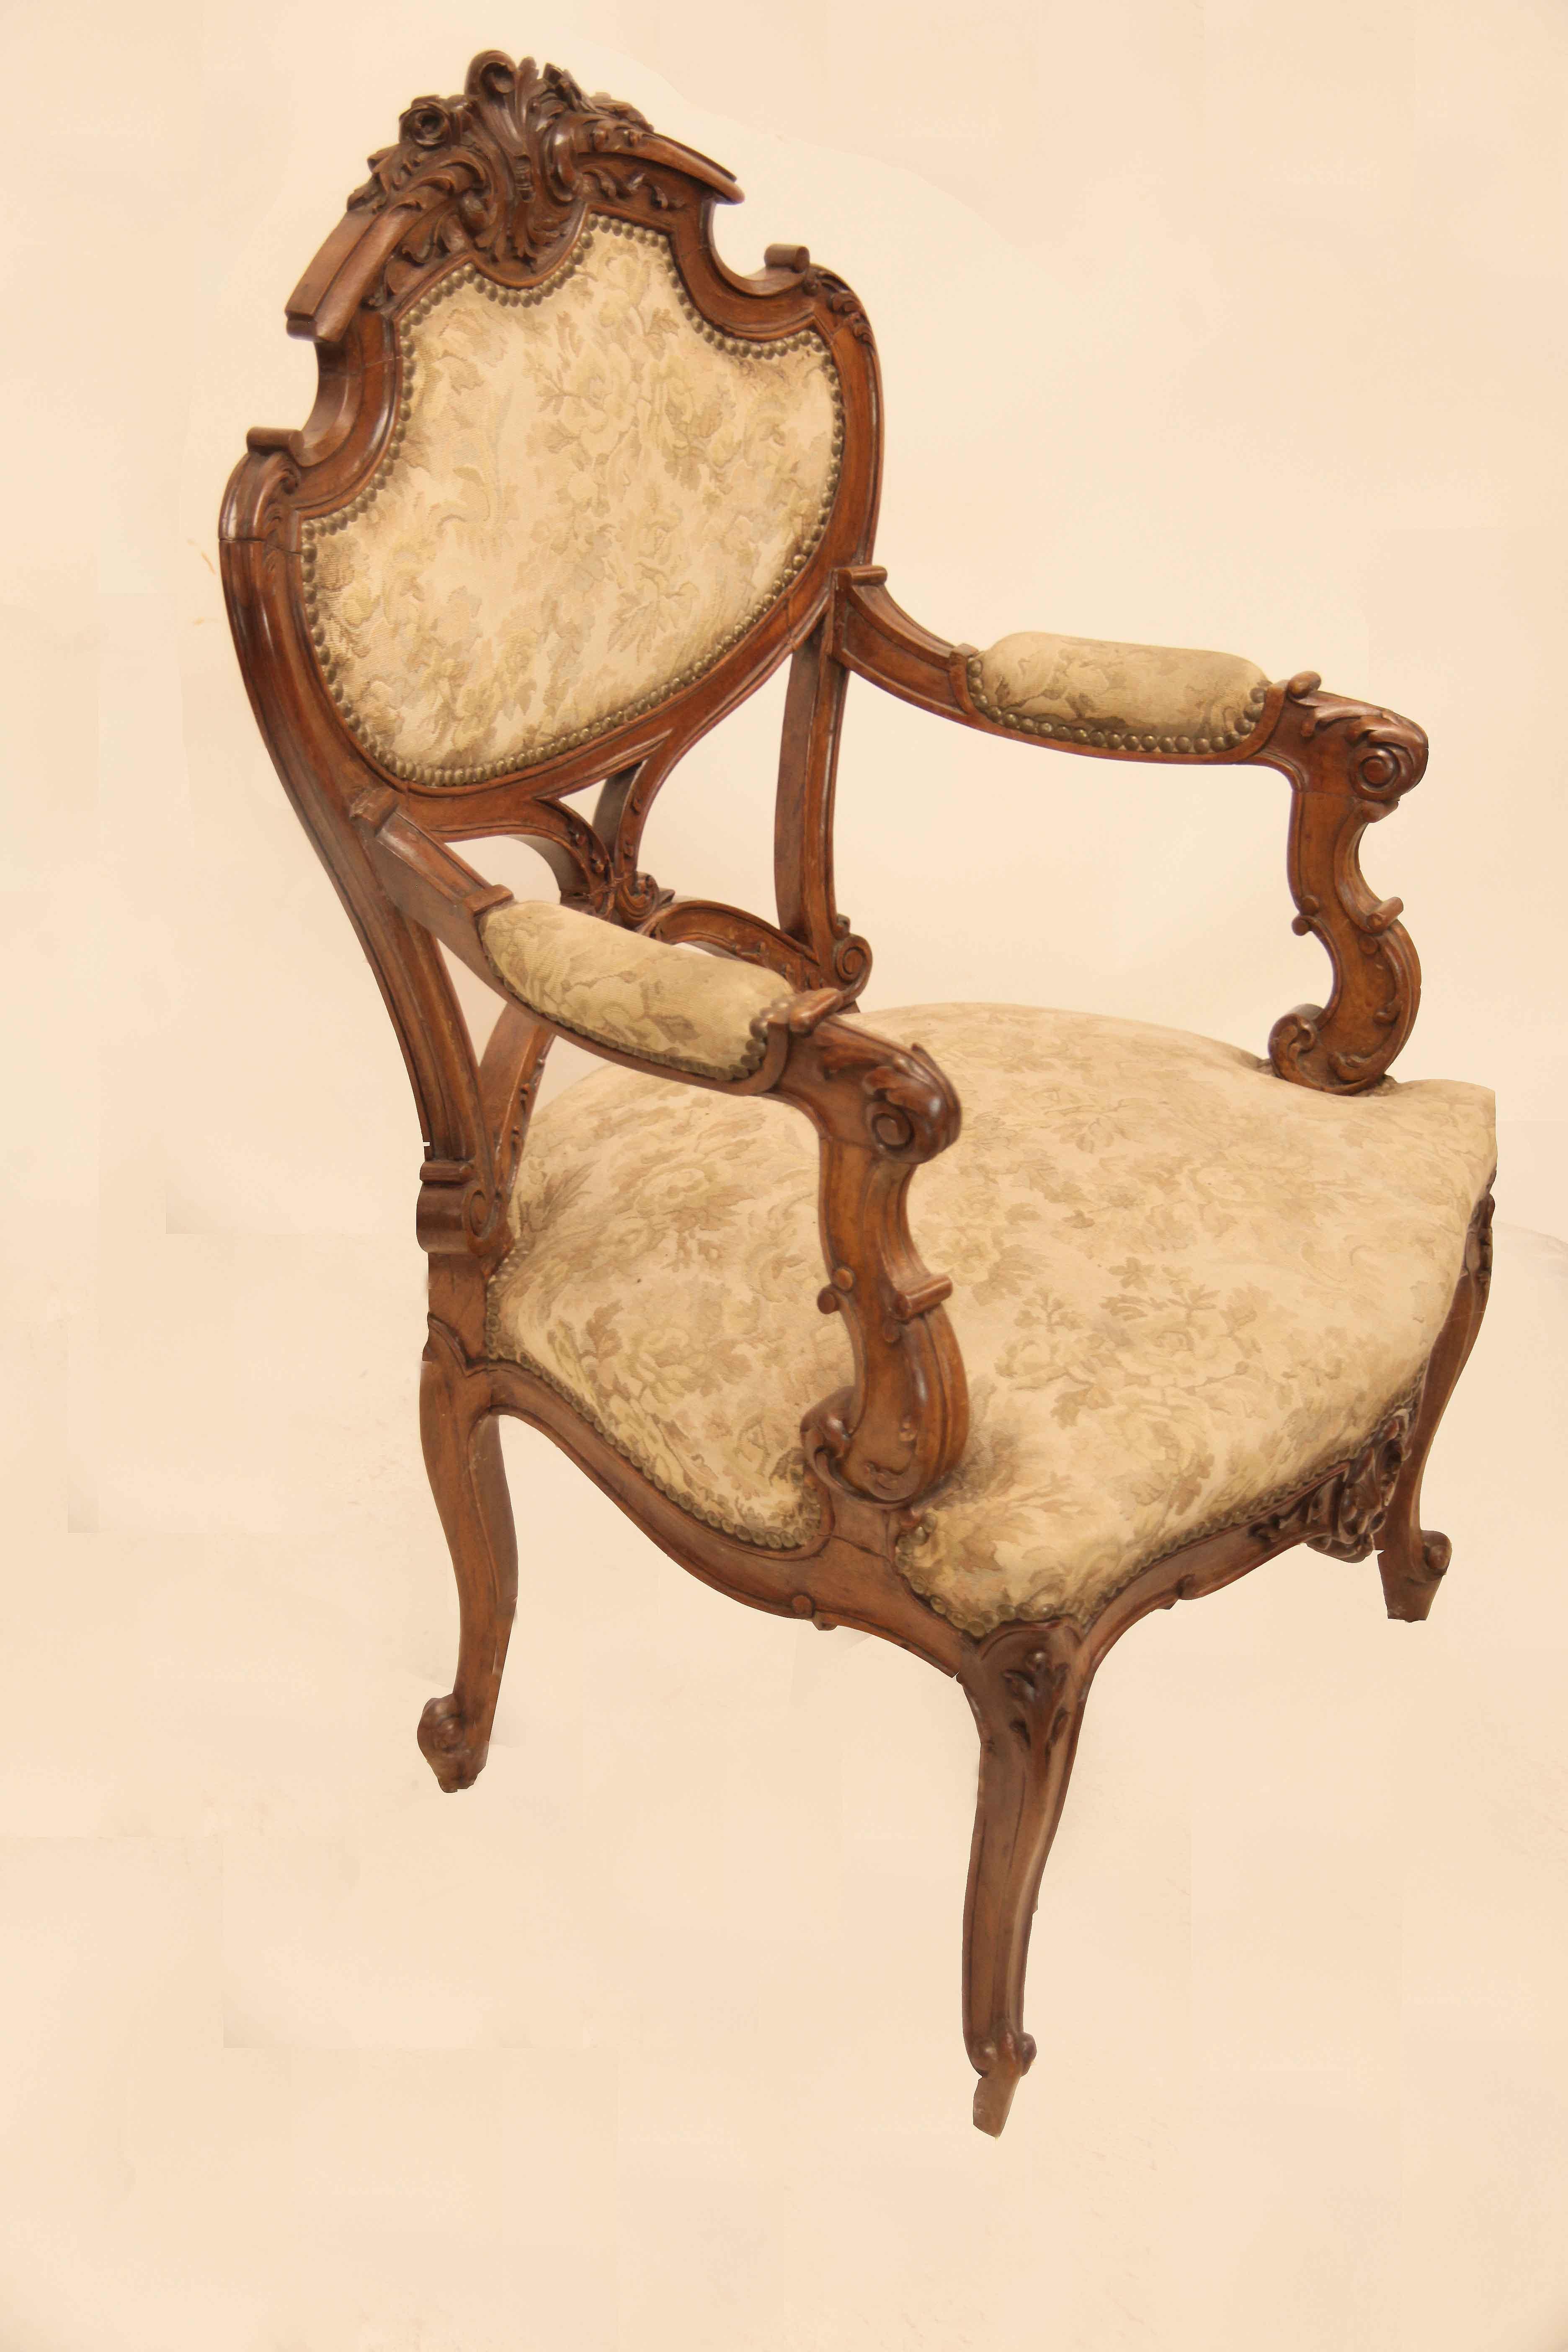 Pair of French carved walnut armchairs, this pair are heavily carved all over in high relief, the photographs show the various architectural and floral features (rosettes, acanthus, volutes,etc.). The serpentine shaped apron has a central carved